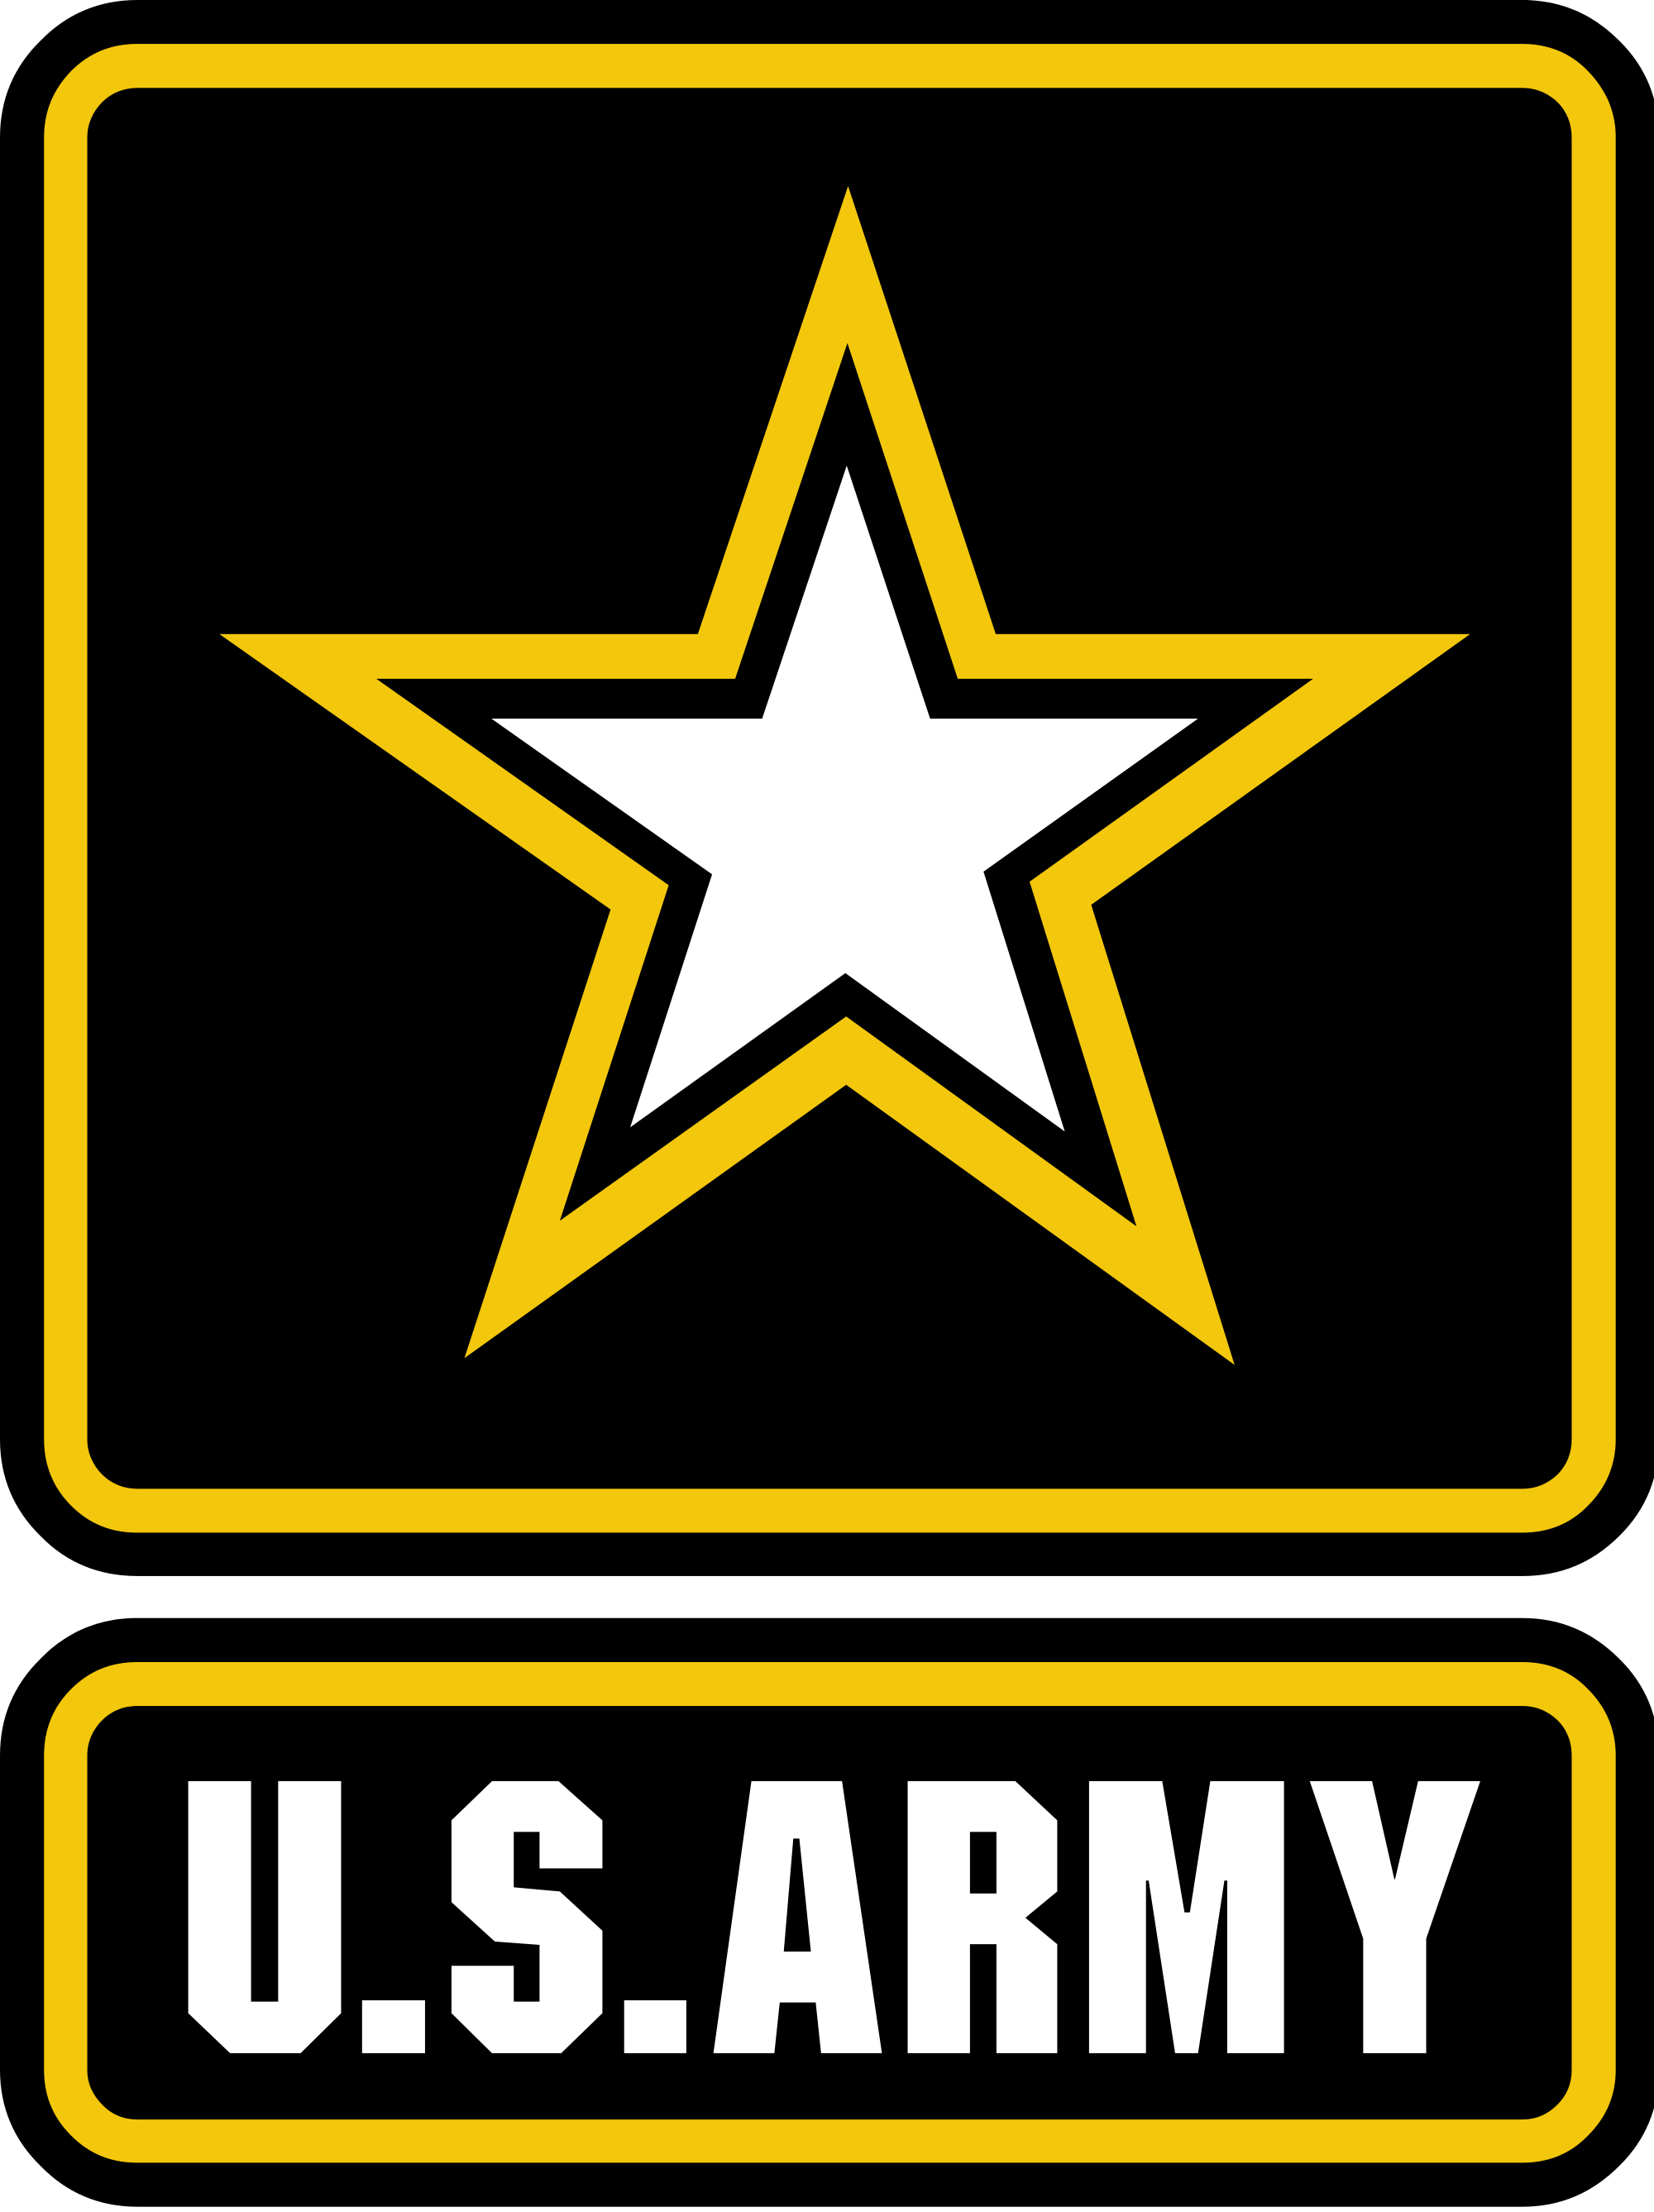 2000px-US_Army_logo.svg.png